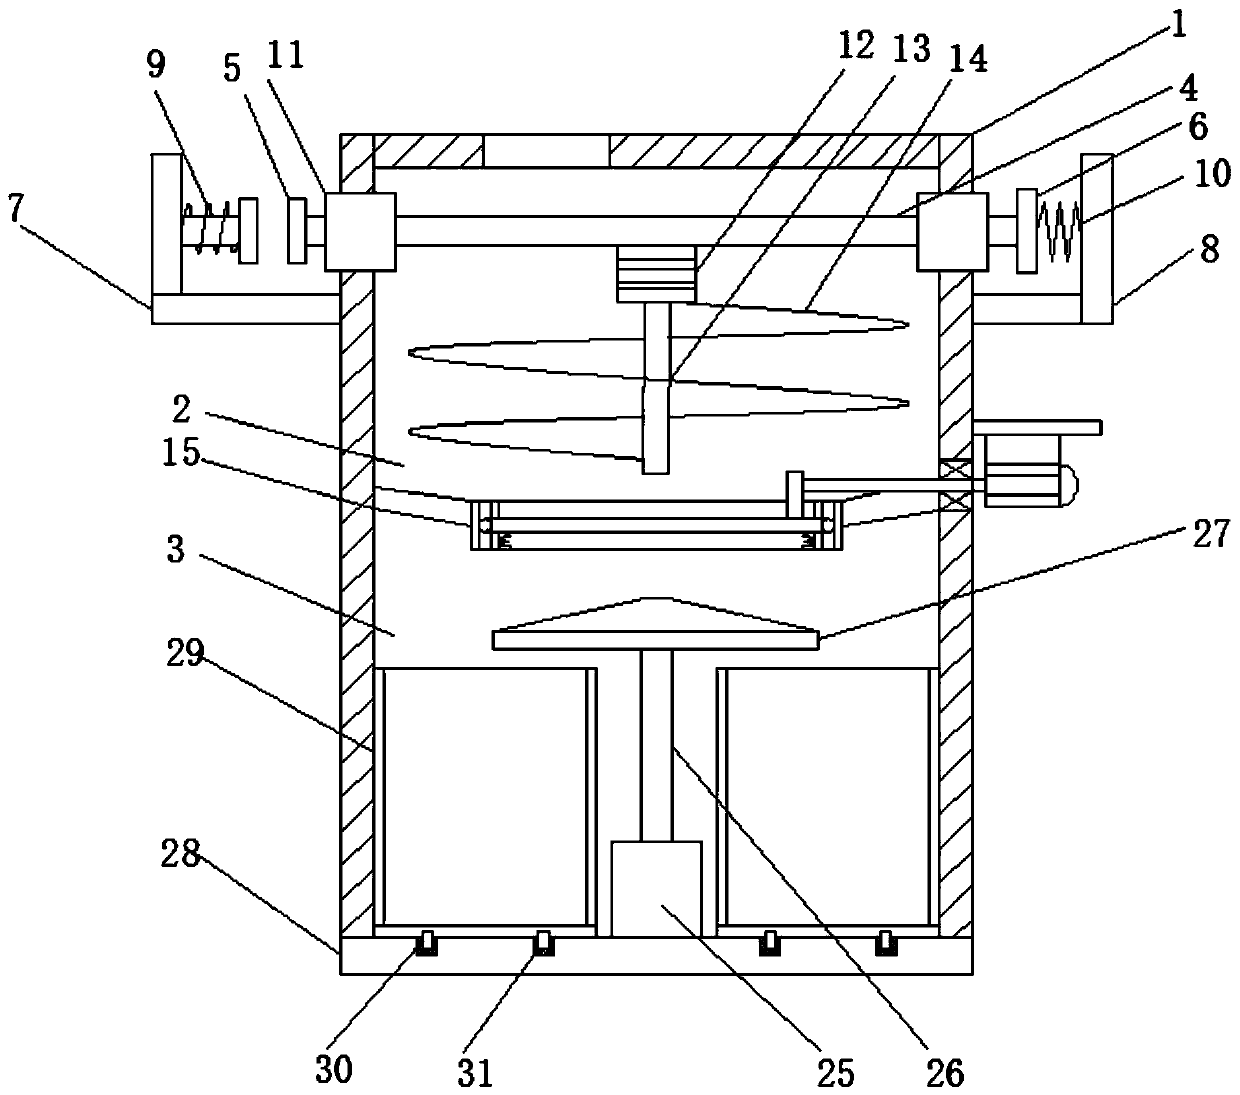 A feed processing device that is convenient for sieving and retrieving materials